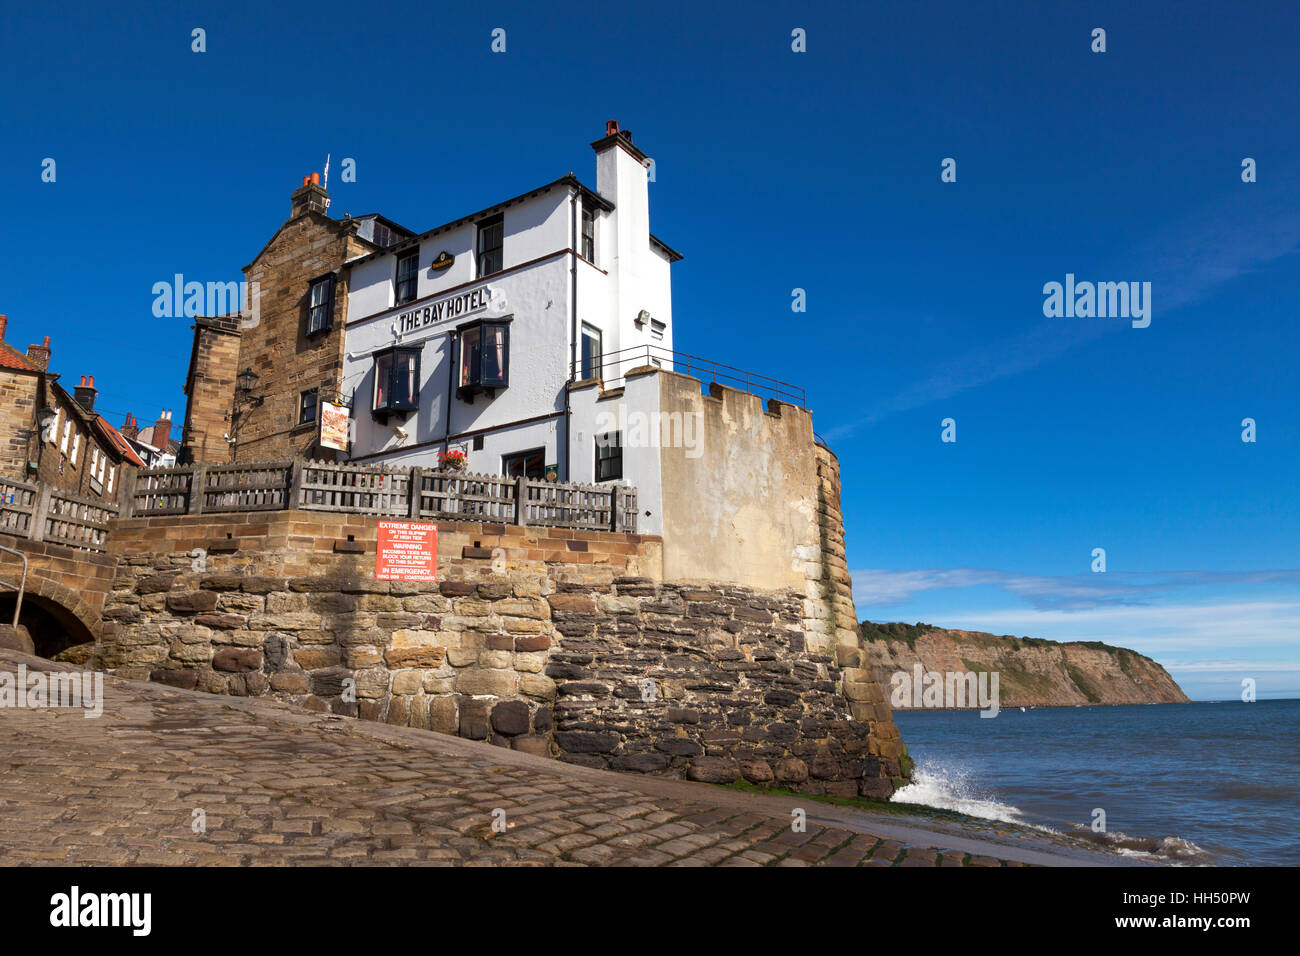 Le Bay Hotel, Robin Hood's Bay, North Yorkshire, Angleterre, Royaume-Uni Banque D'Images